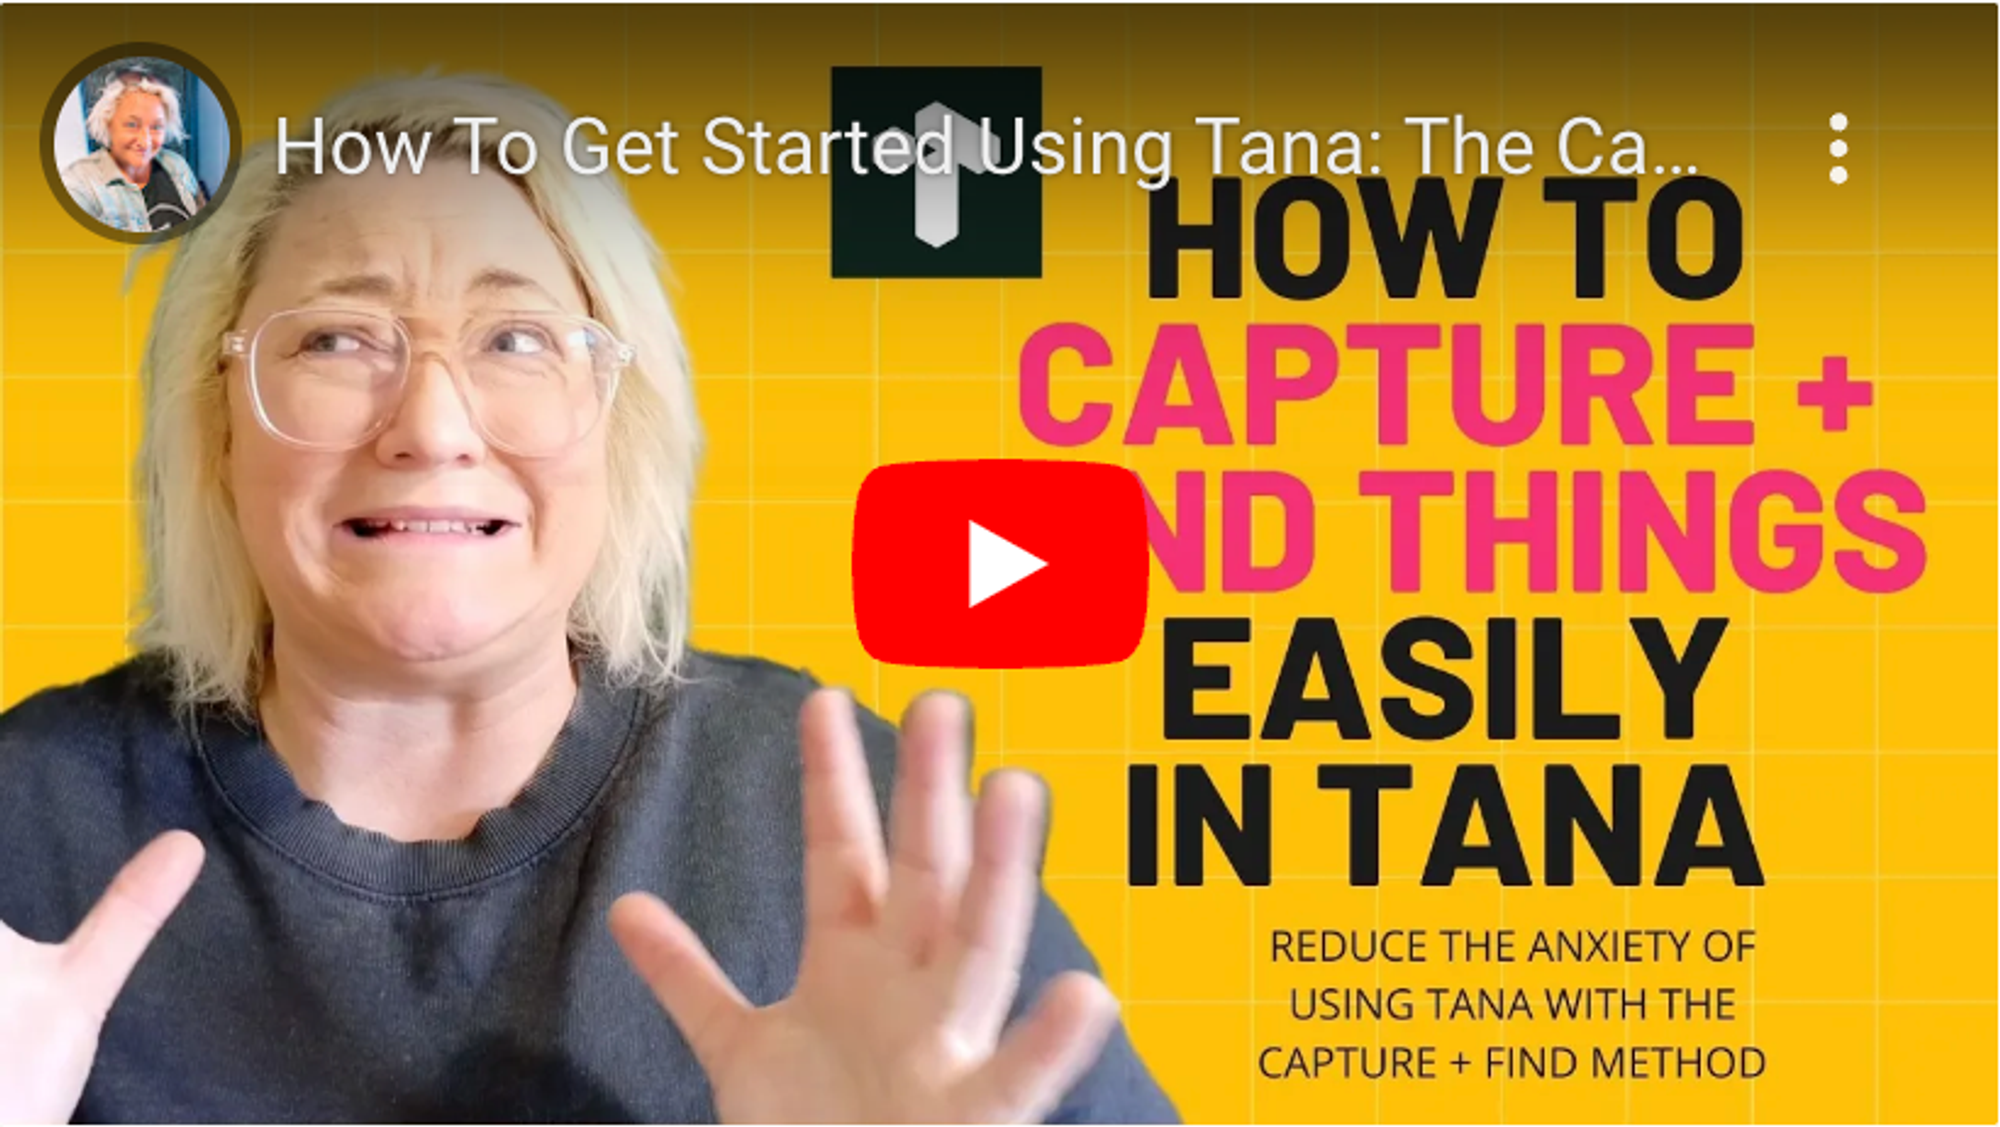 How To Get Started Using Tana: The Capture + Find Method